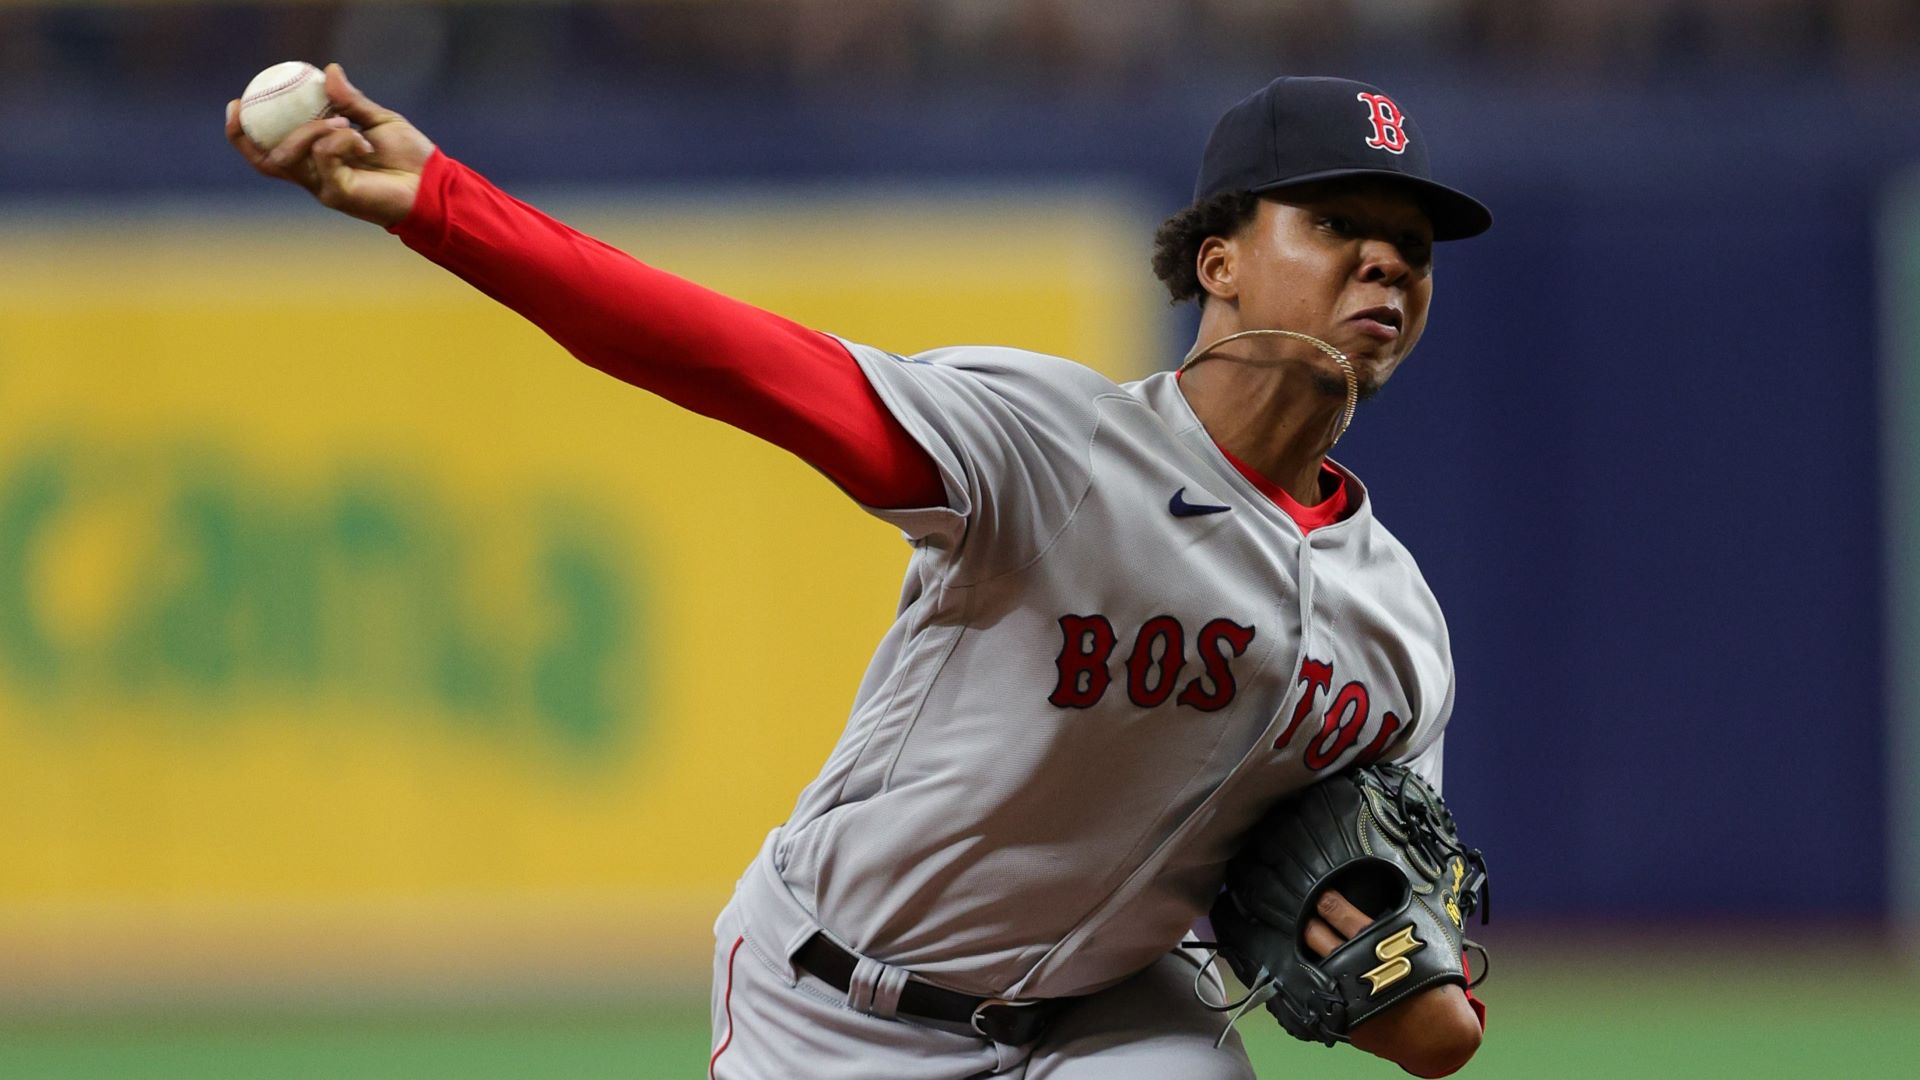 Red Sox Notes: Boston Relies On Young Stars For Road Win